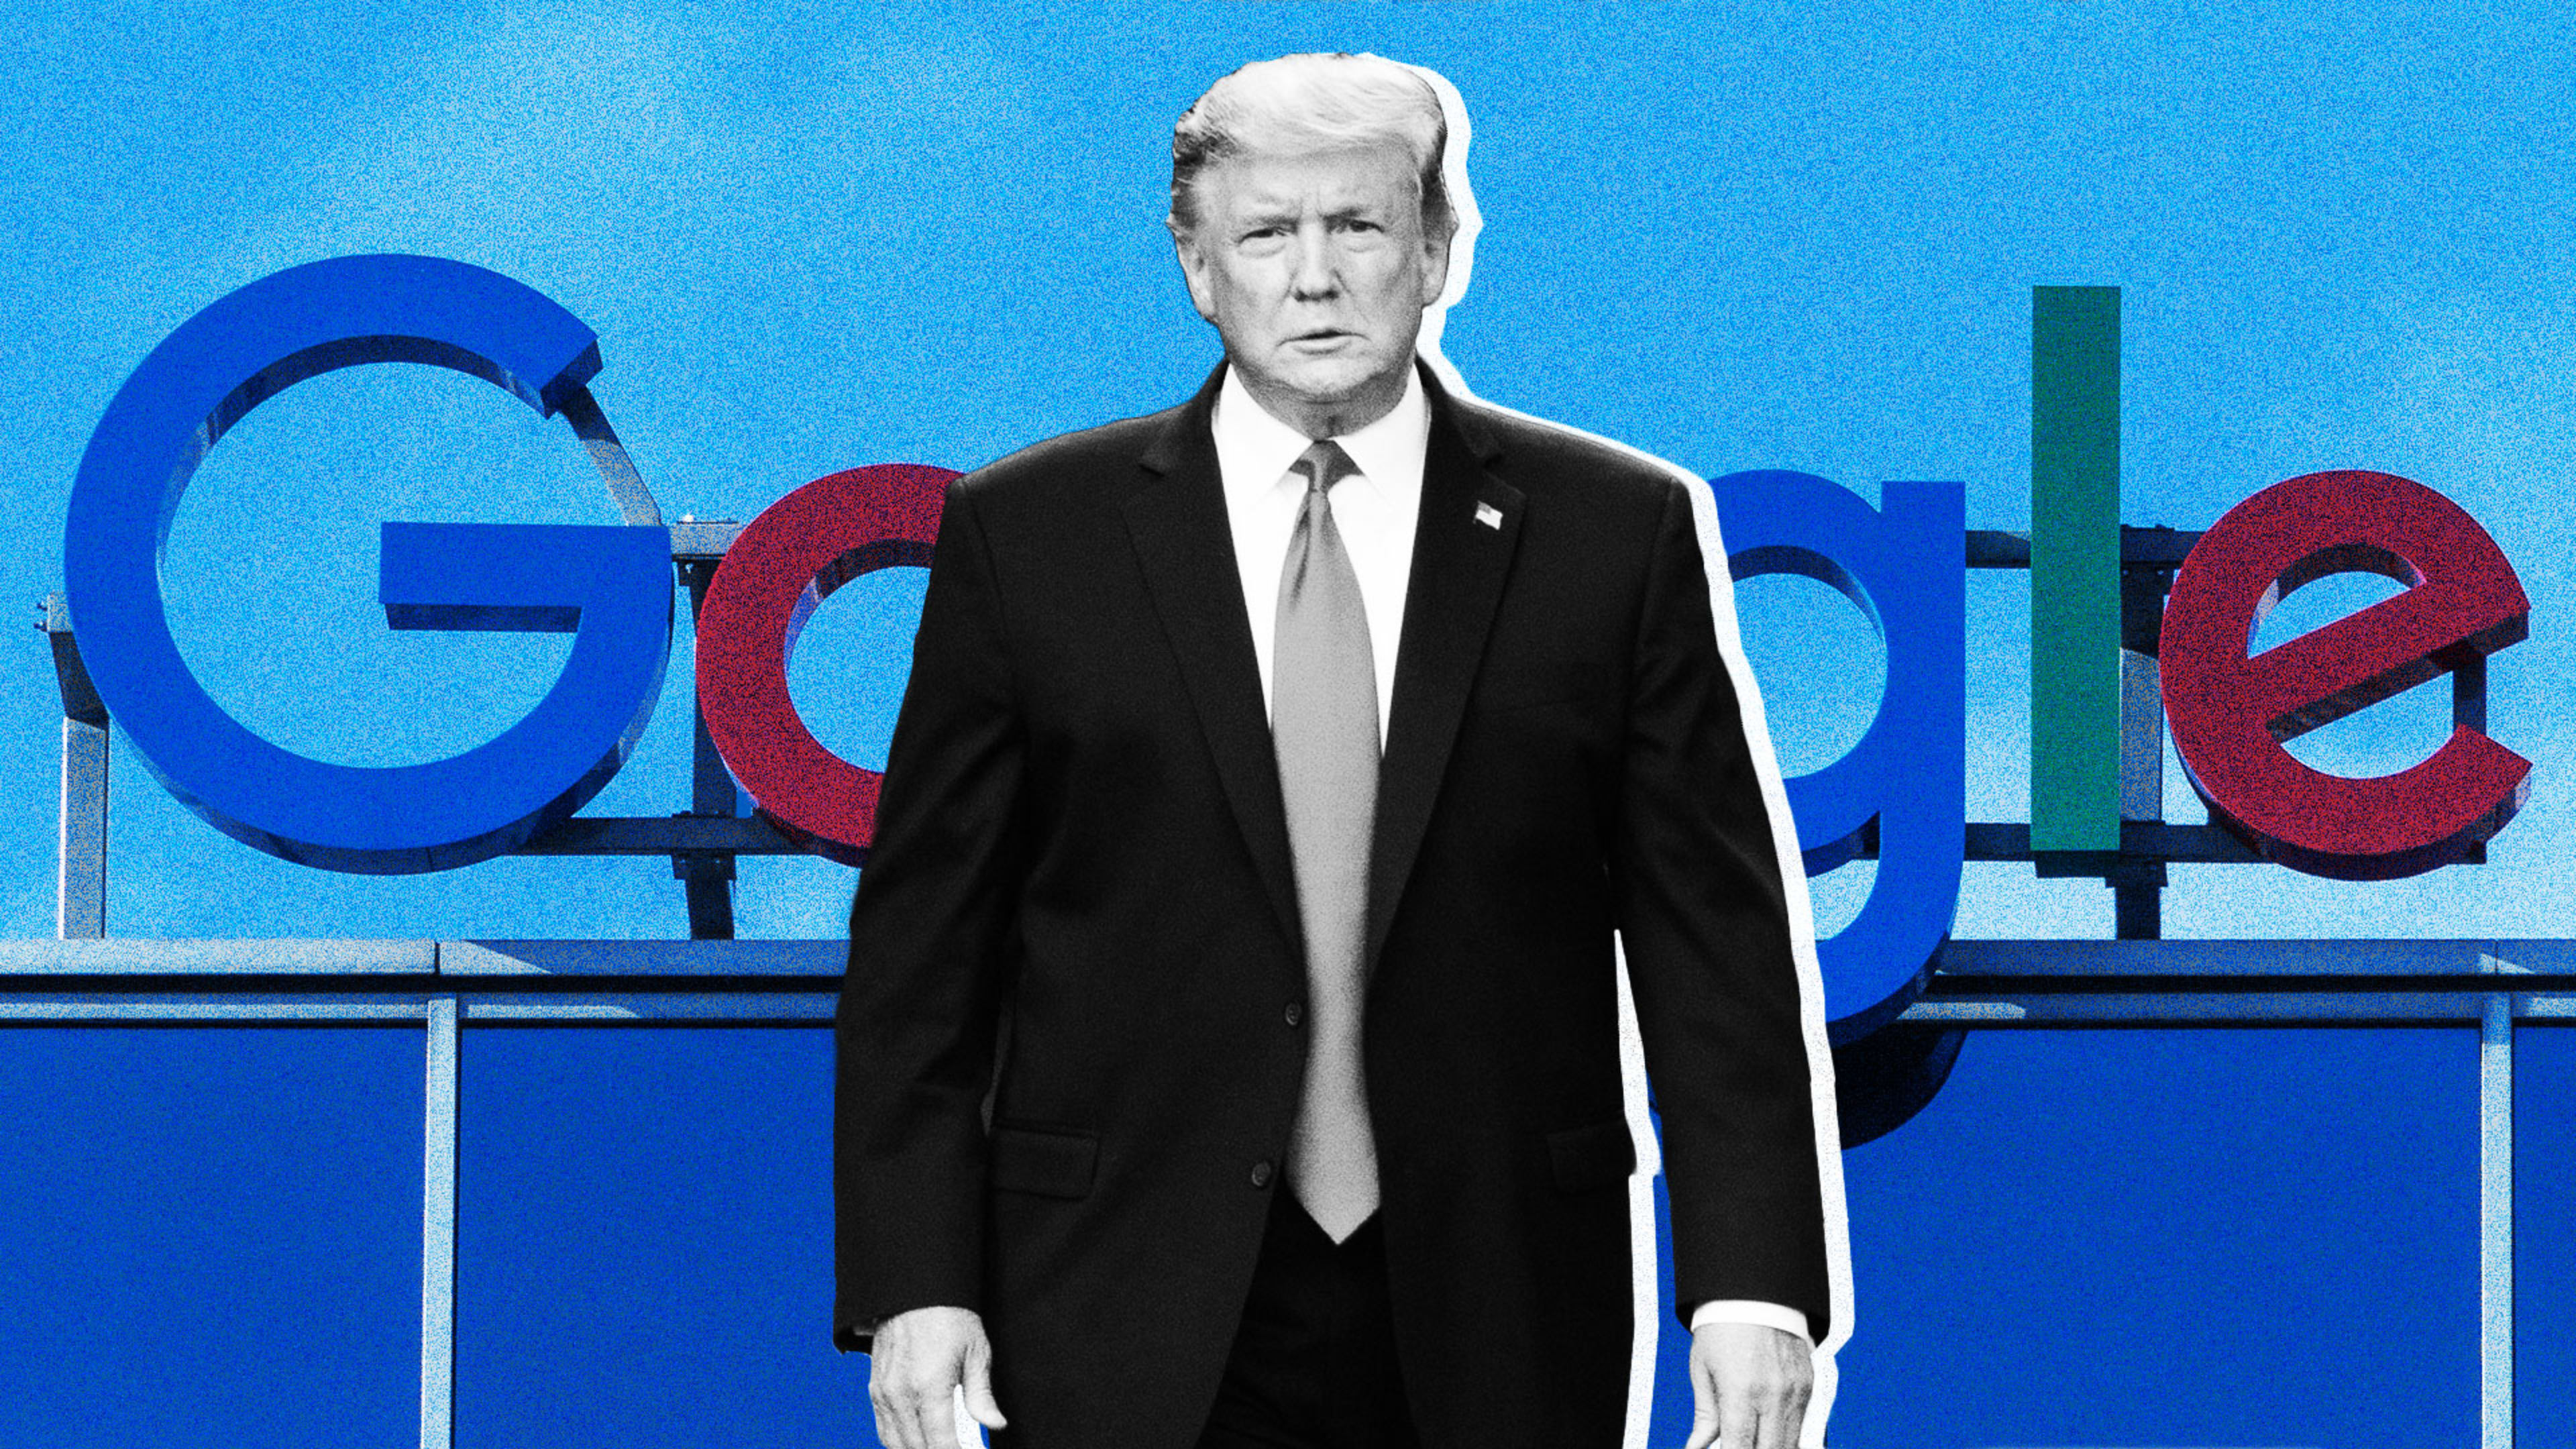 Google could be targeted in the first antitrust probe of Big Tech under Trump